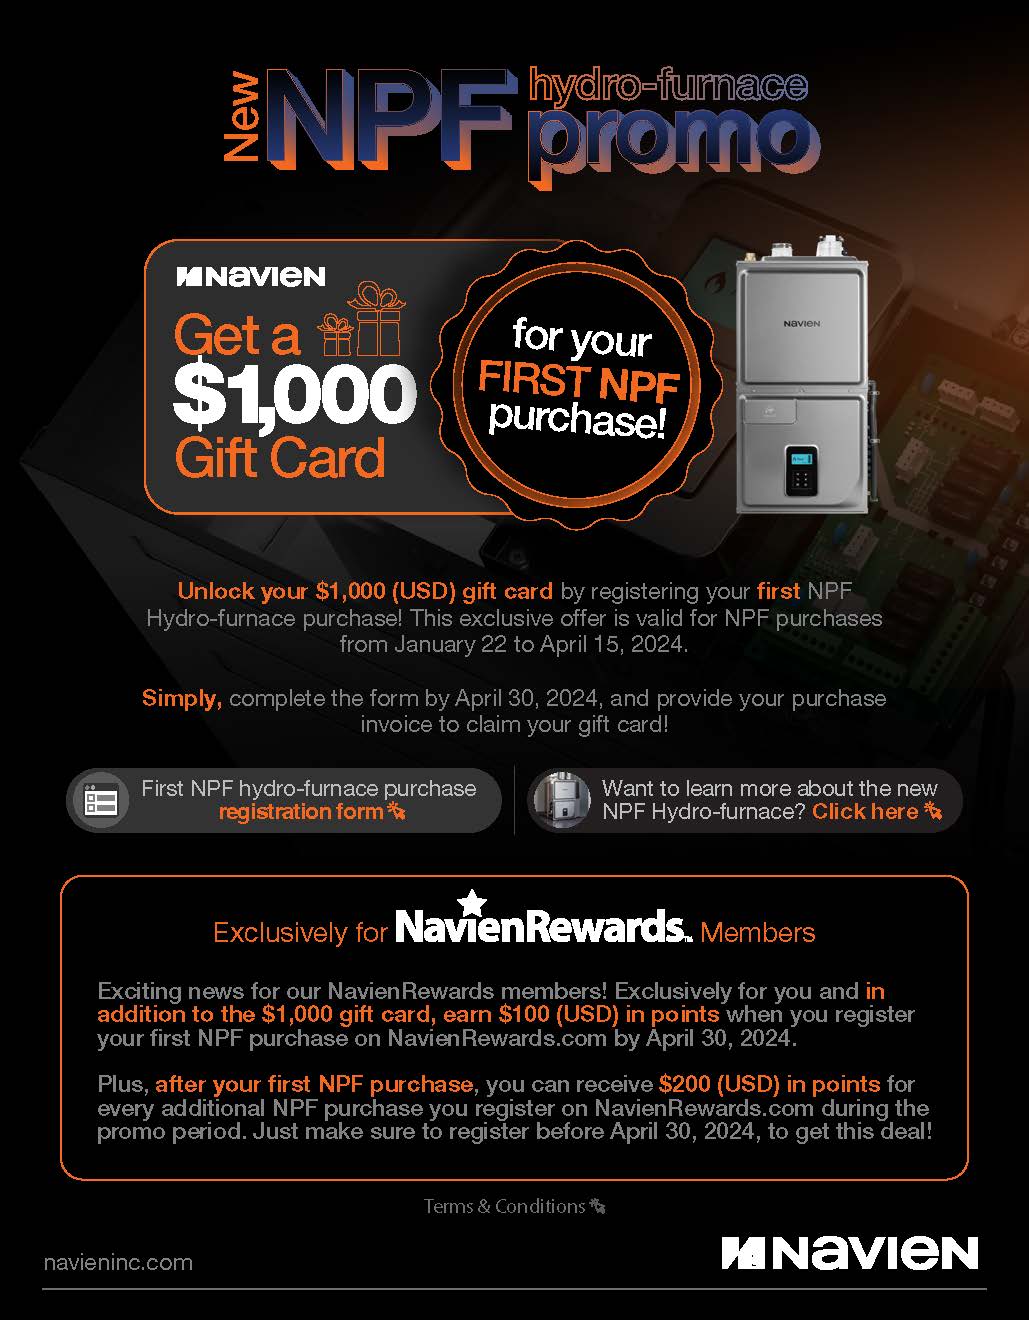 Get a $1000 Gift Card! Image